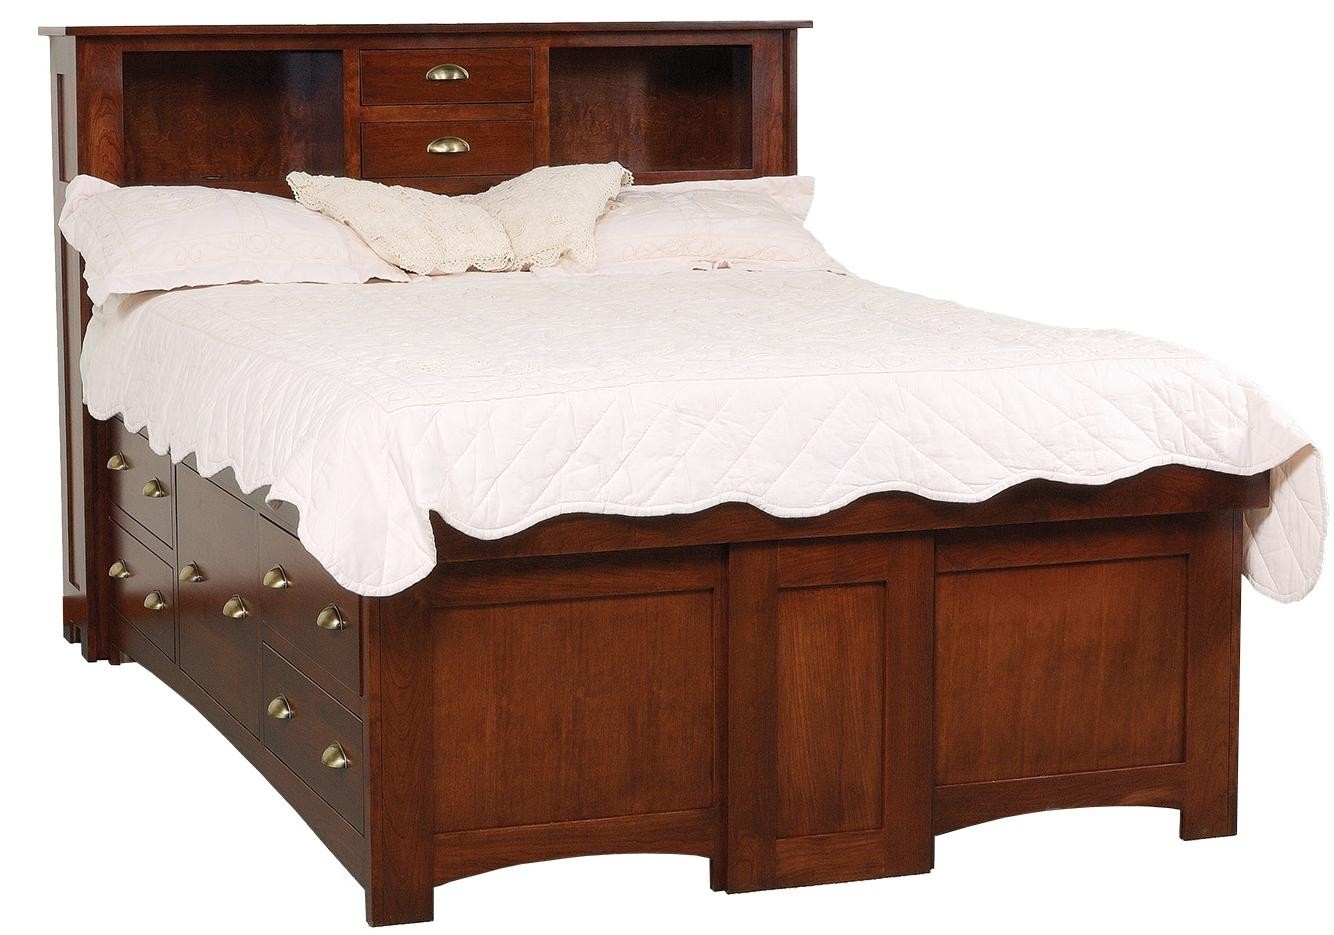 California king solid wood pedestal bed with 10 drawers